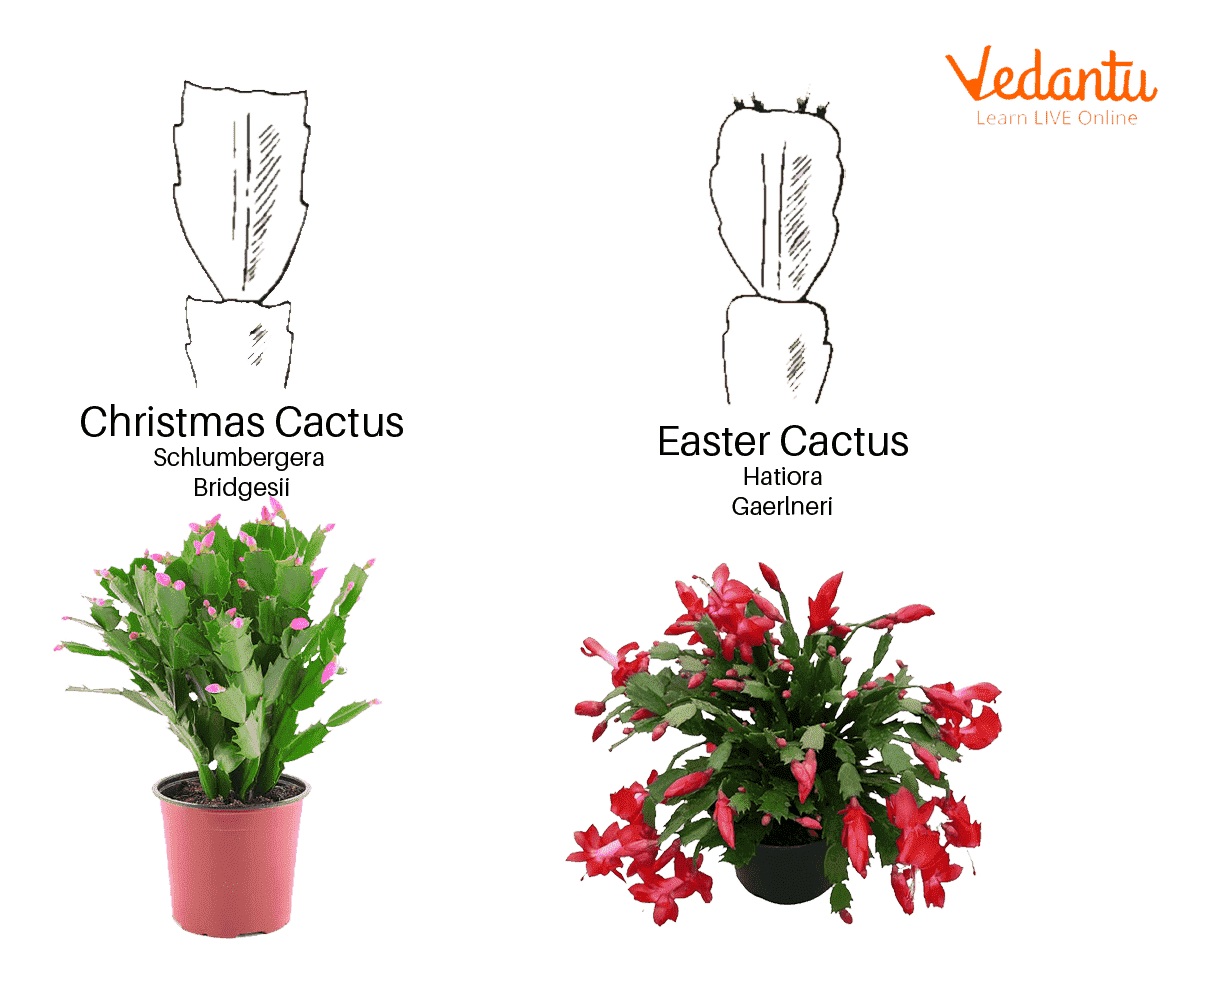 Difference Between Christmas and Easter Cactus